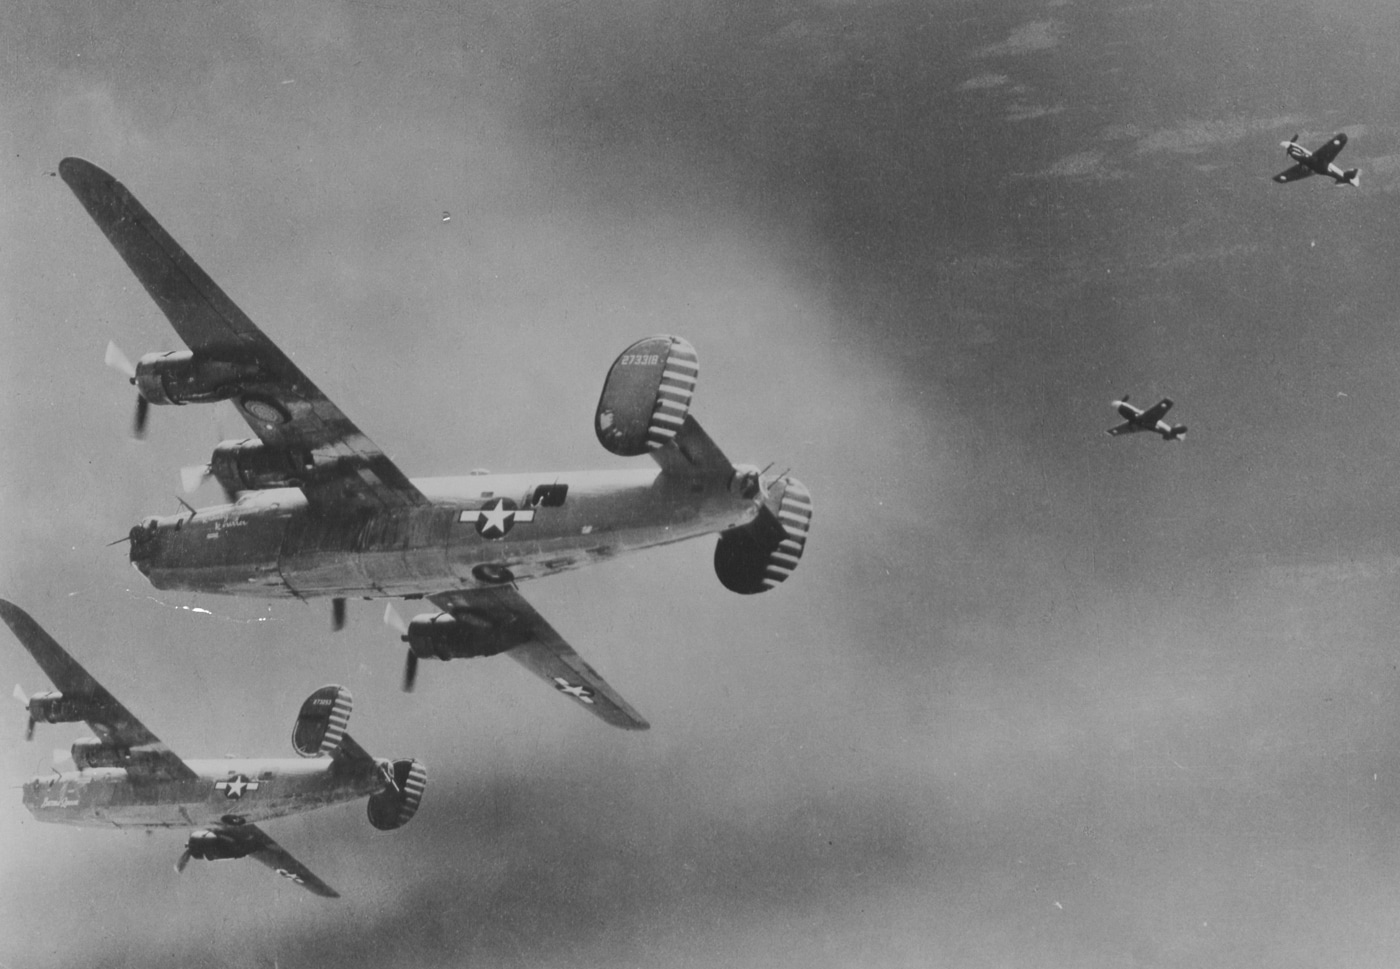 b-24 liberators esorted by curtiss p-40 fighters